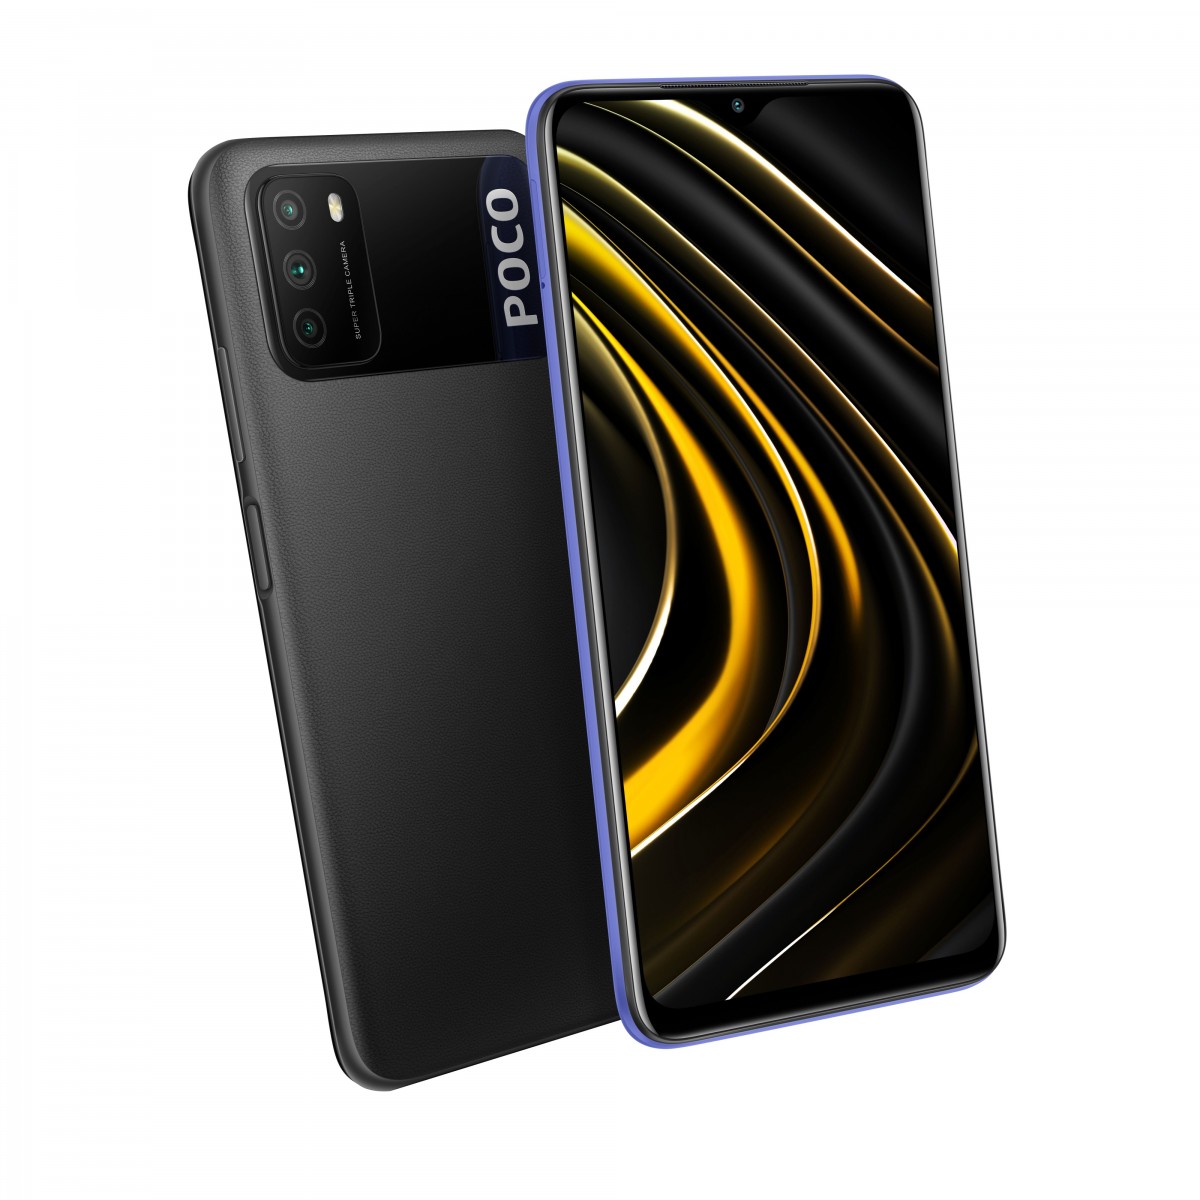 Poco M3 is official with 6,000mAh battery that can charge other devices